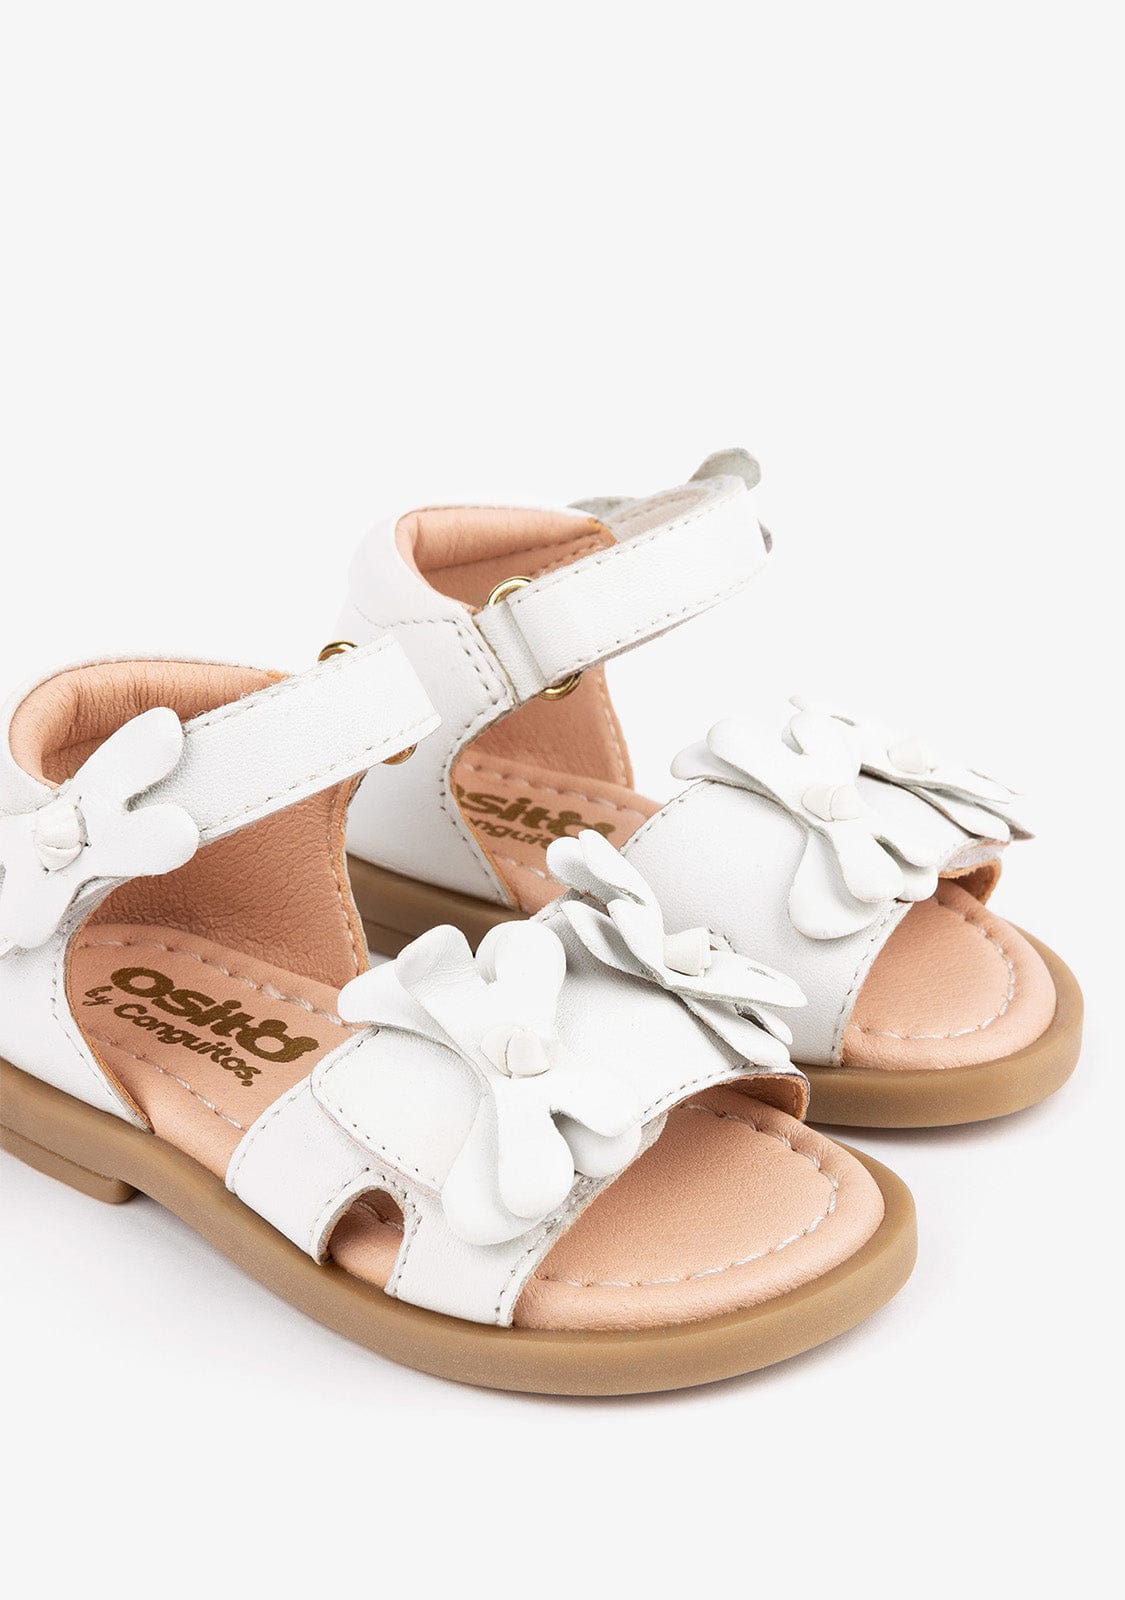 OSITO Shoes Baby's White Flowers Sandals Leather